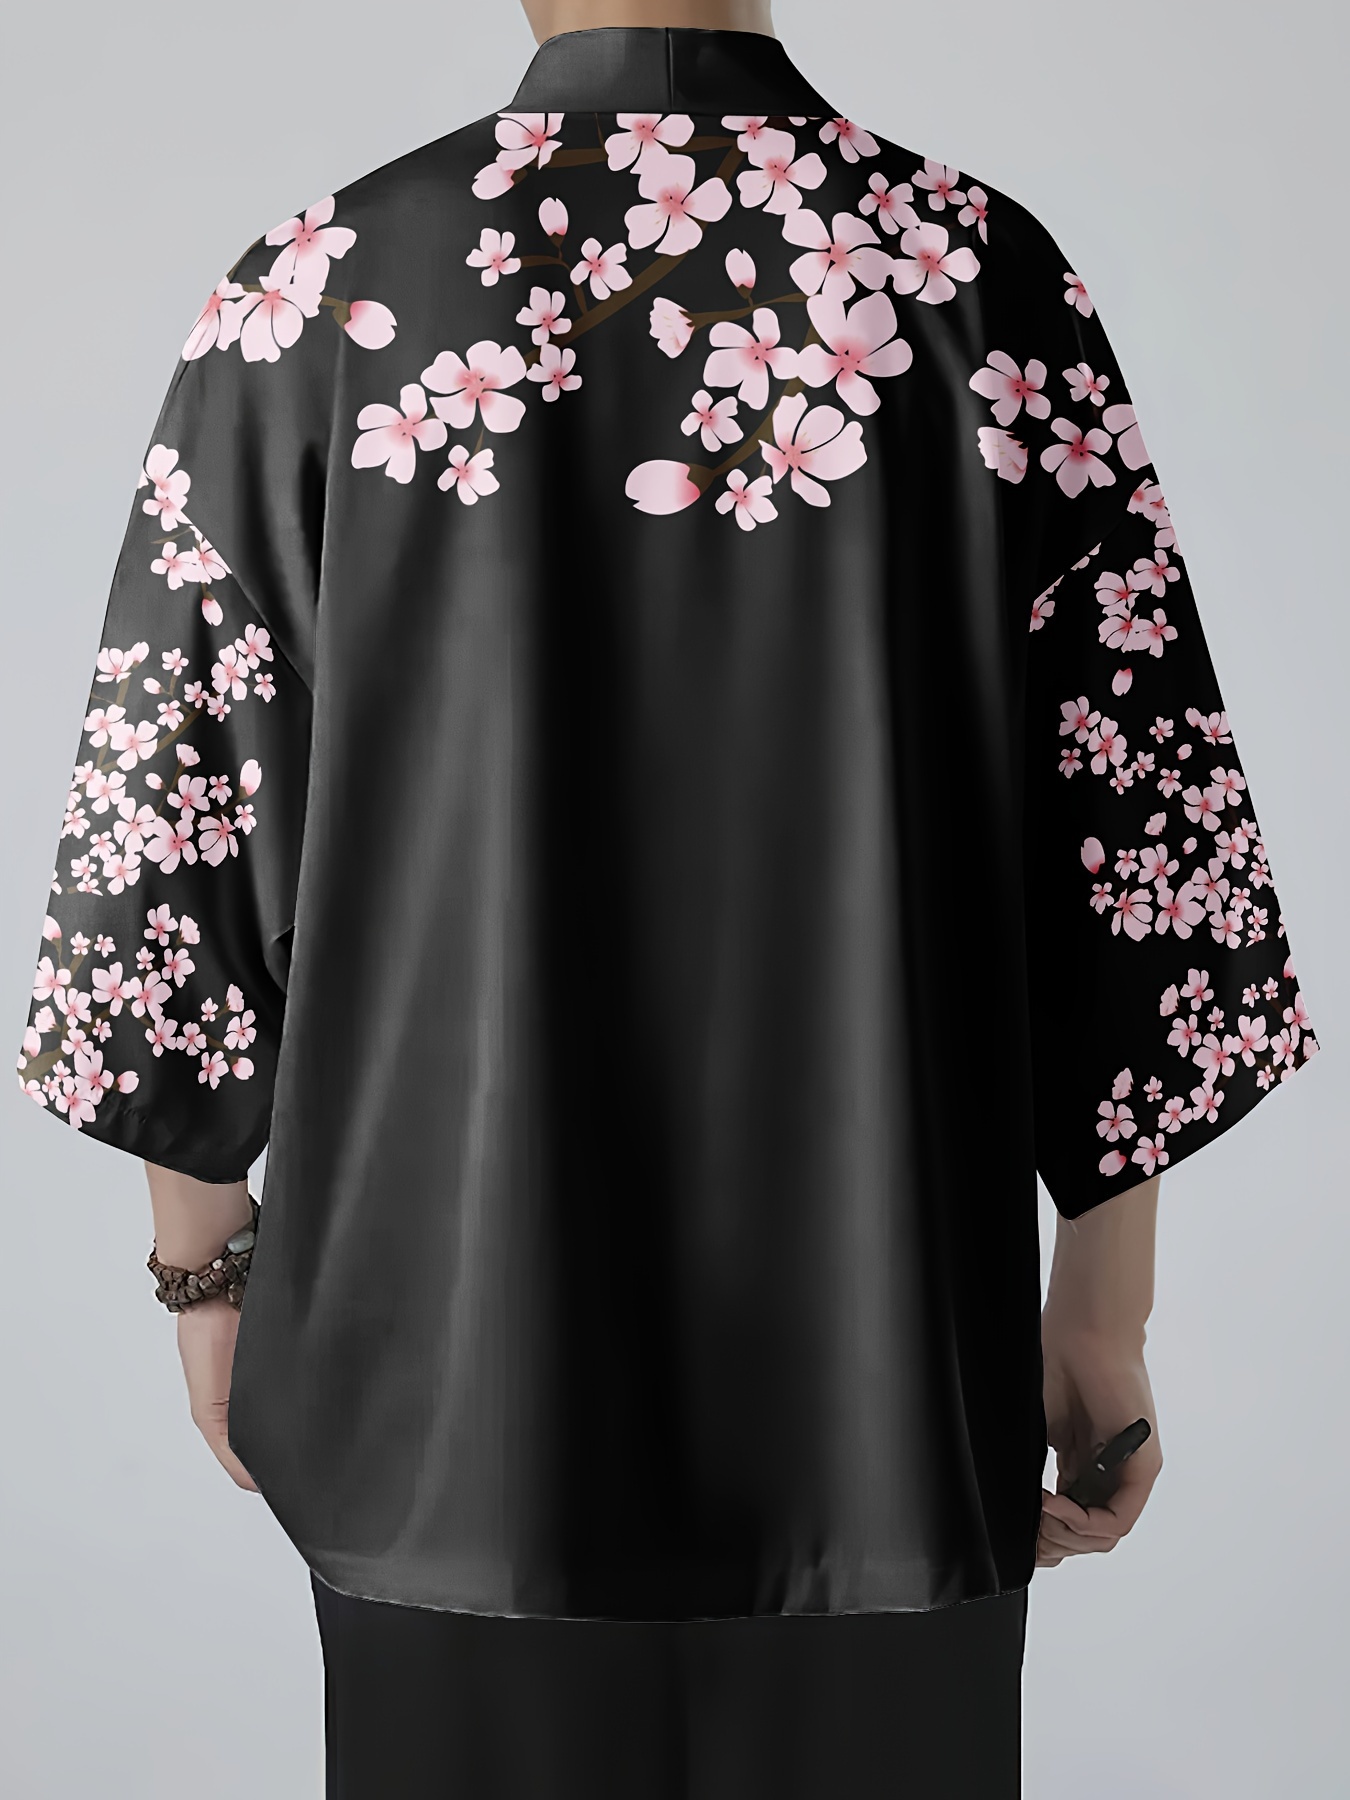 mens vintage style floral print loose open front kimono for traditional cultural activities in japan